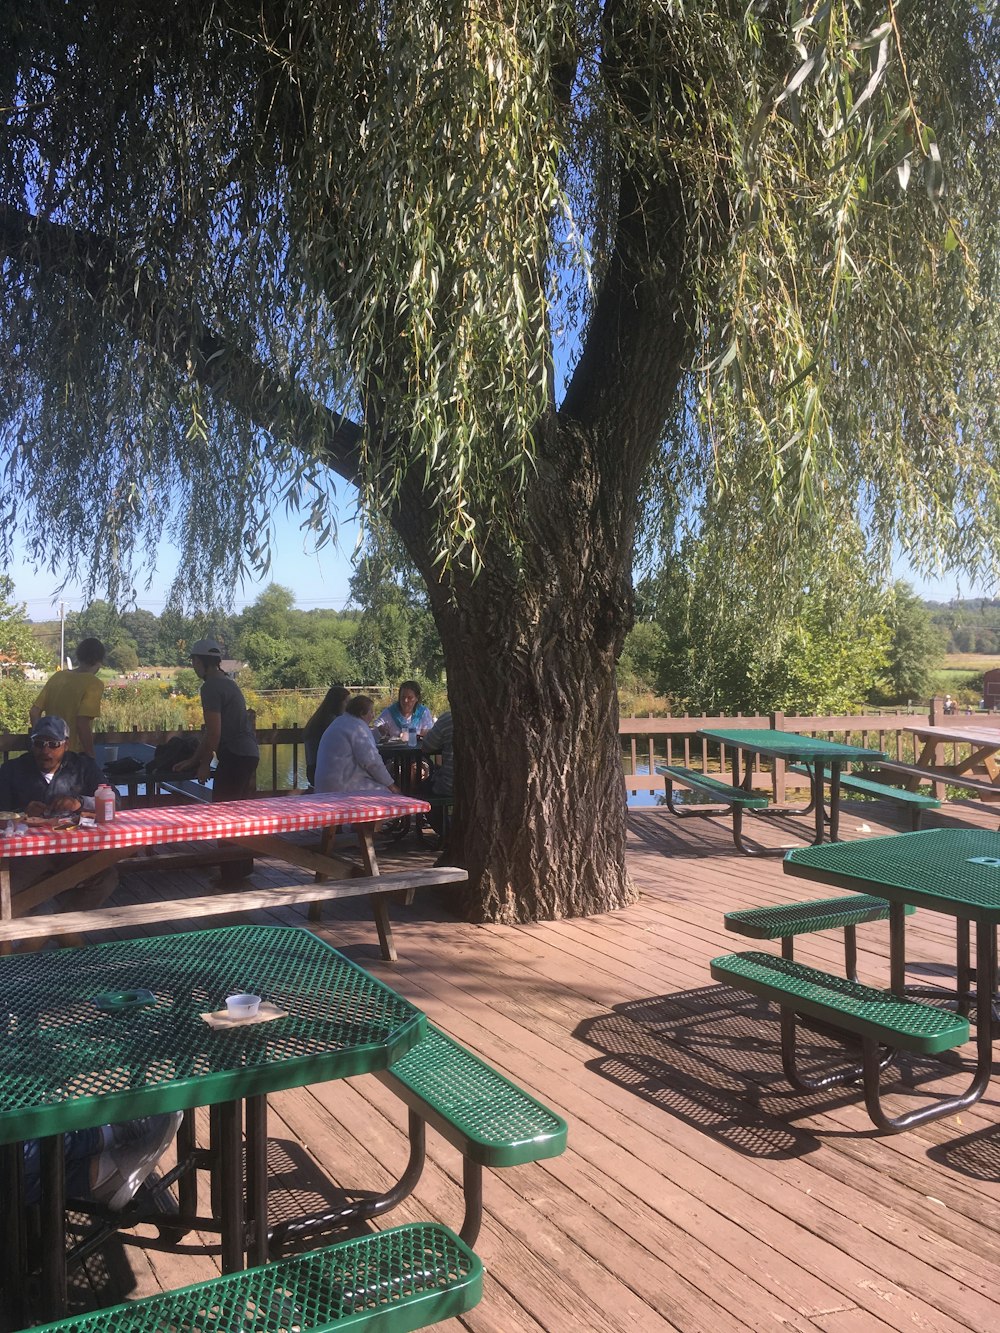 A group of people sitting at picnic tables under a tree photo – Free Ct  Image on Unsplash